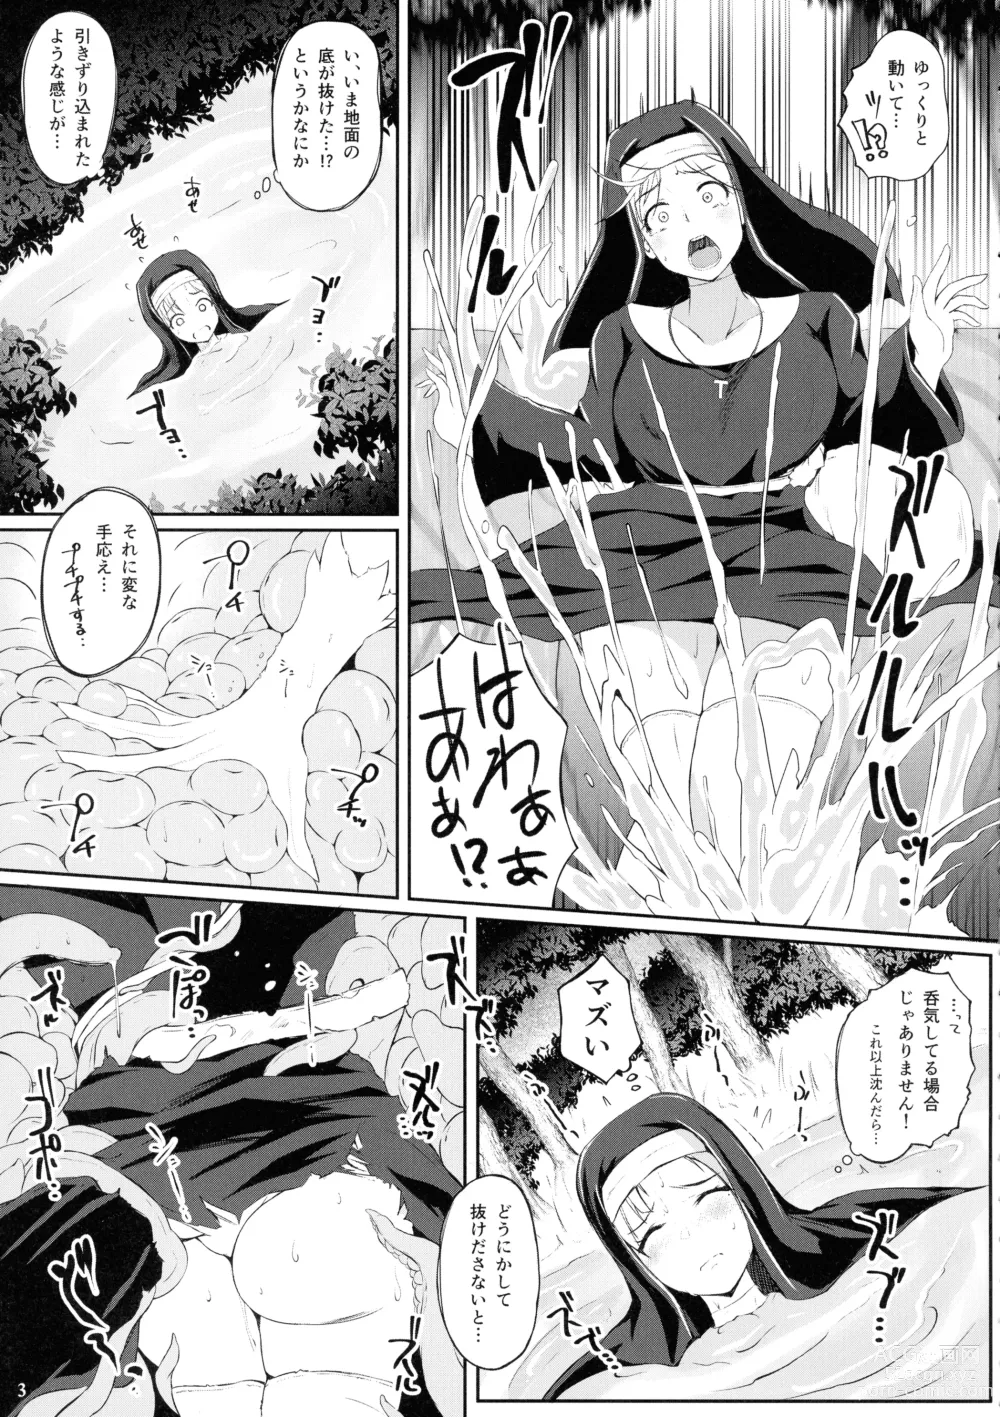 Page 5 of doujinshi Grope Trap Nepenthes